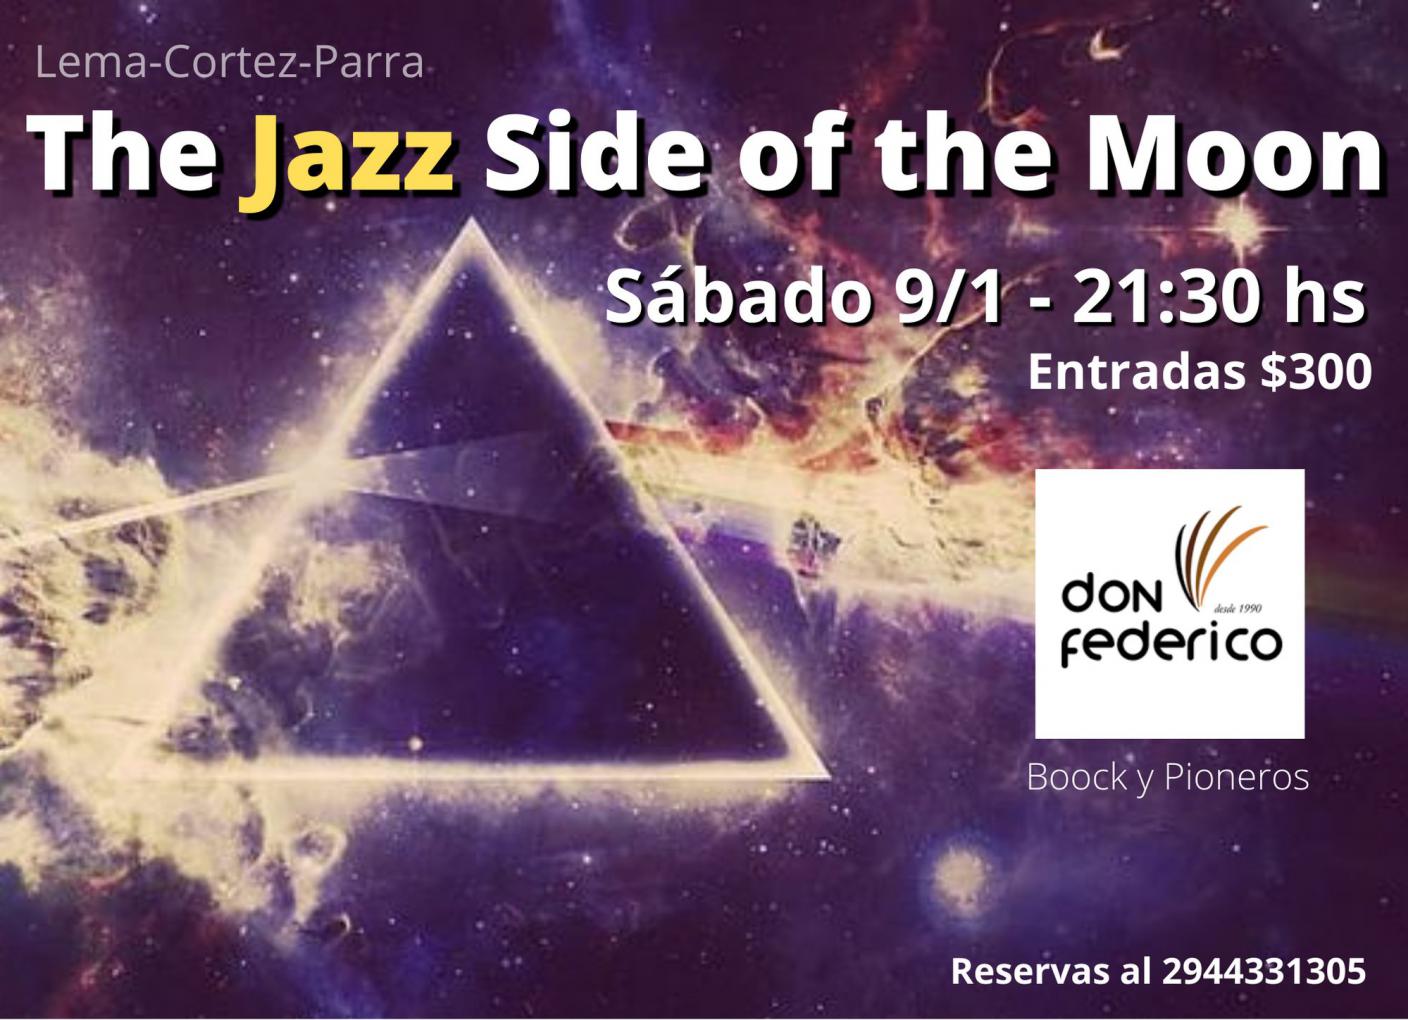 The Jazz side of the Moon